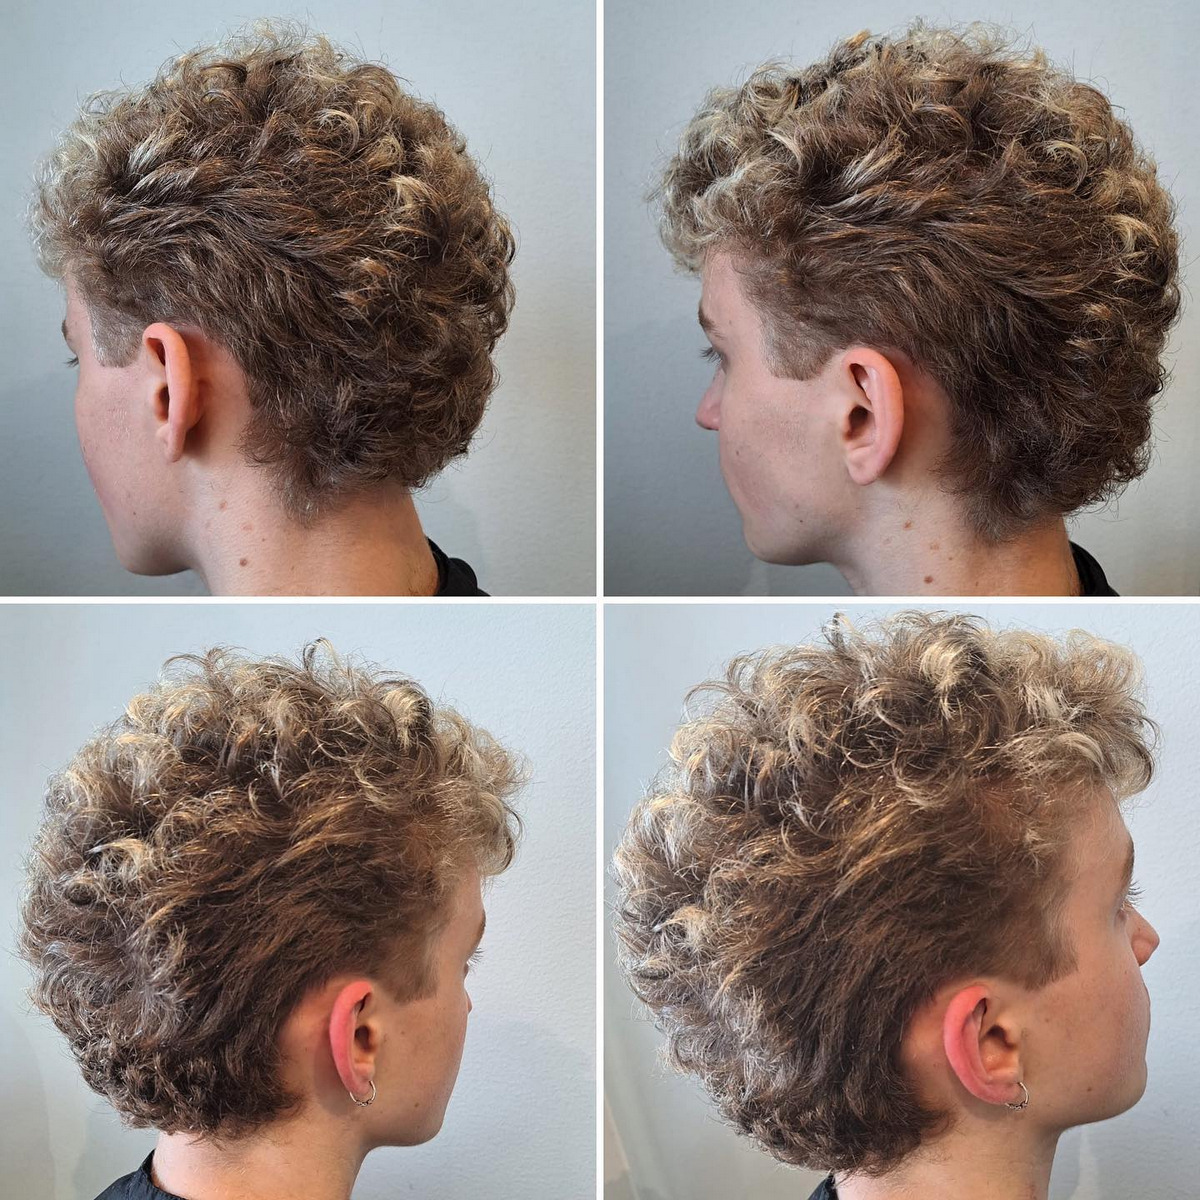 Return of the mullet: 1980s hairstyle is making a comeback | Lifestyles |  thedailynewsonline.com